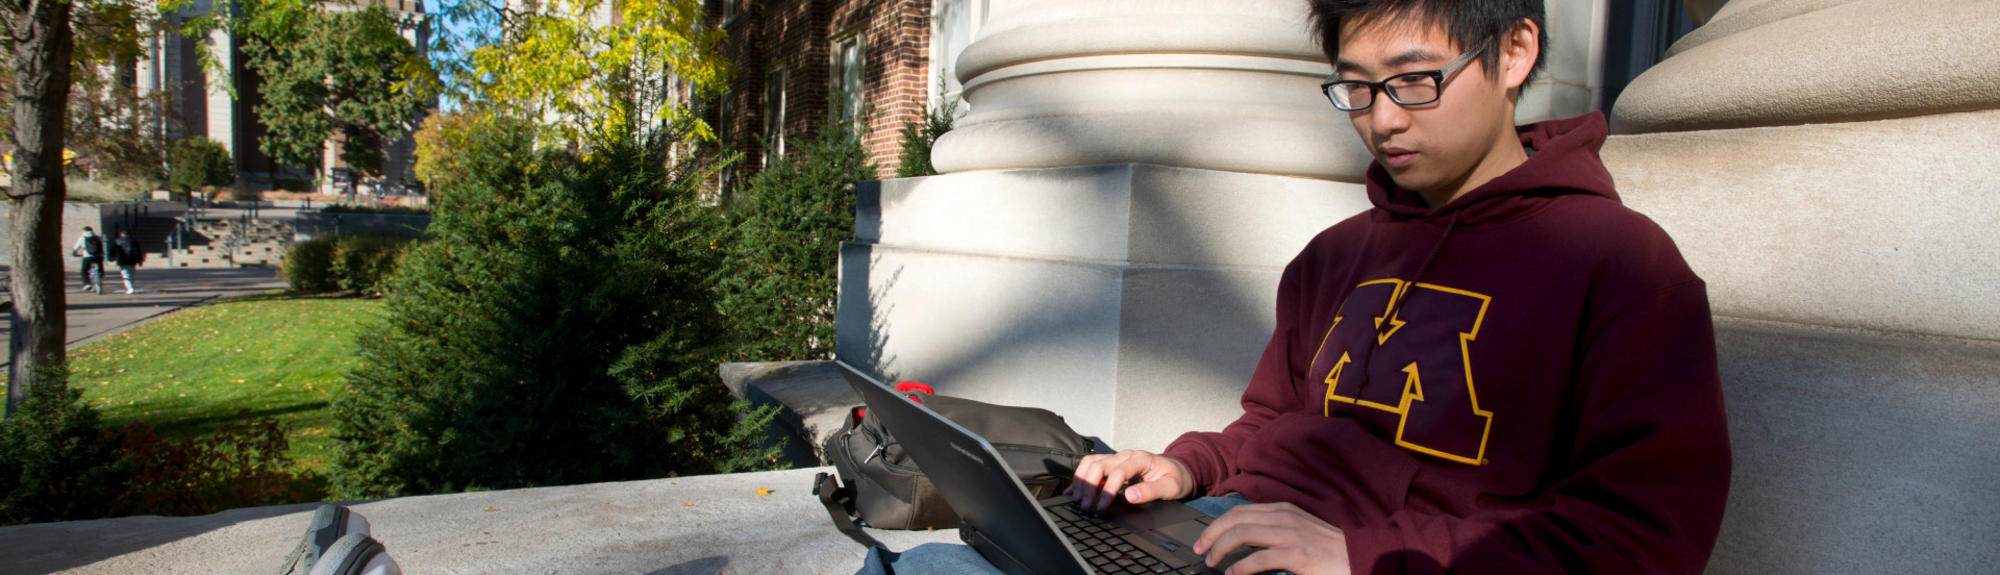 A student works outside on their laptop